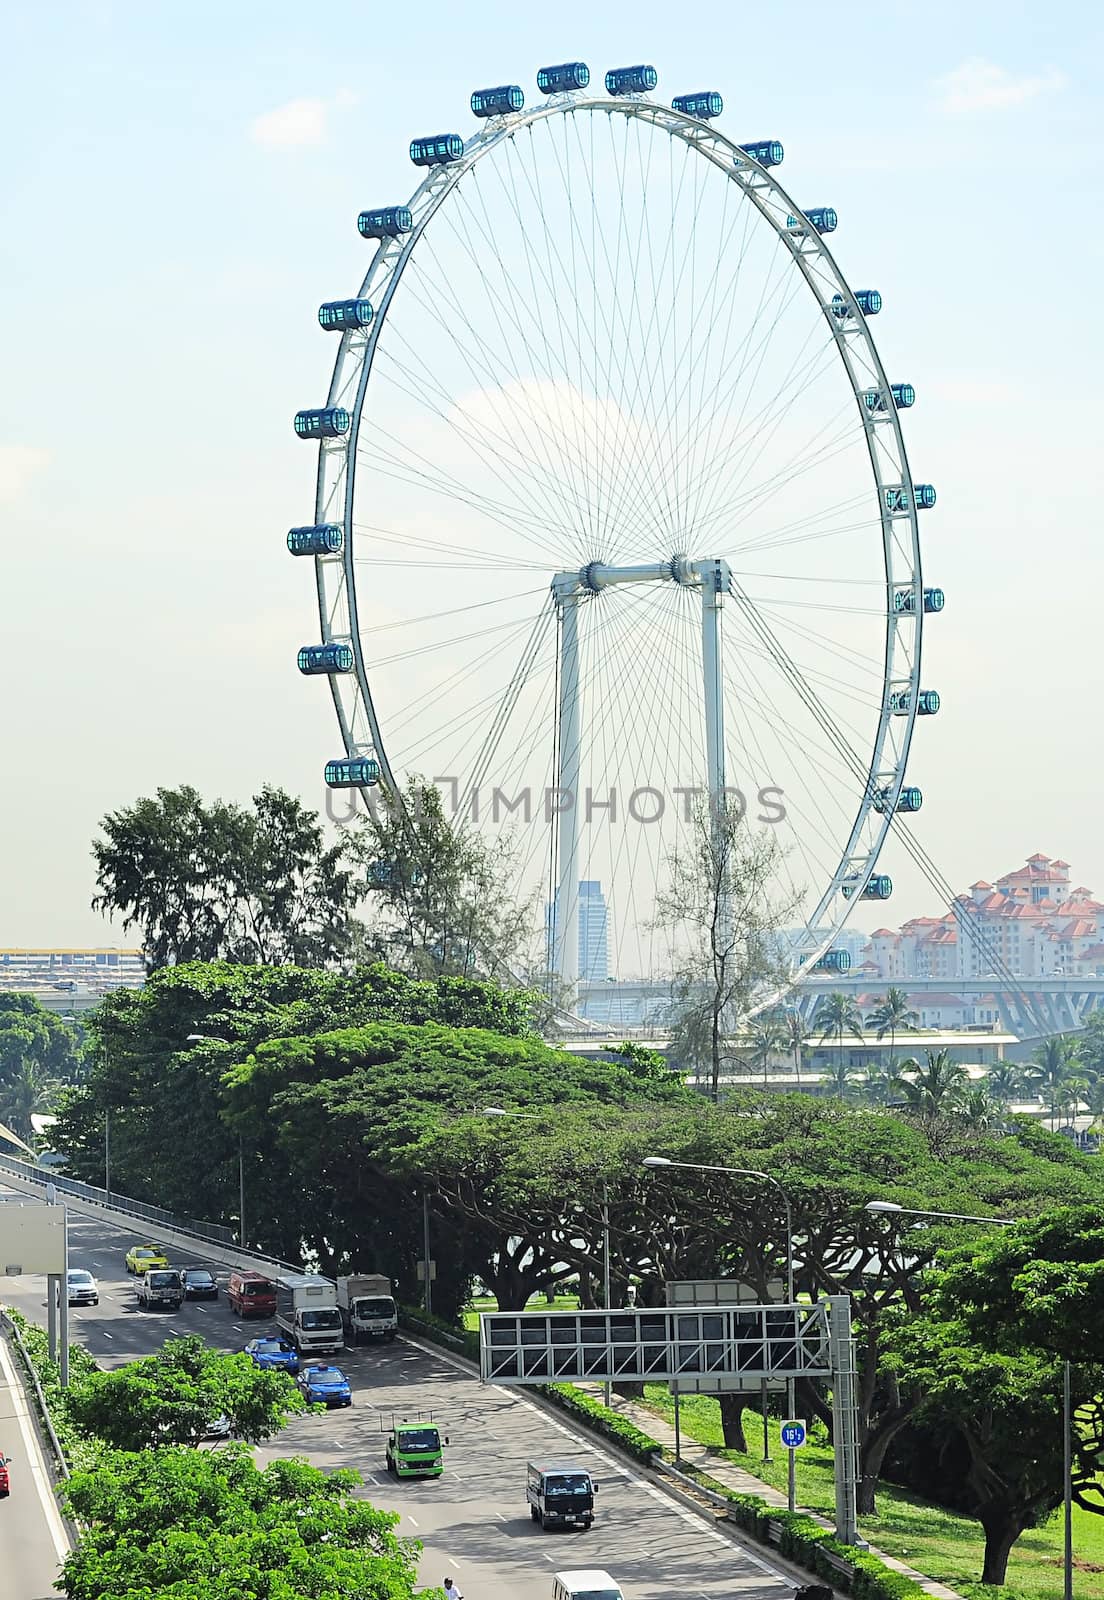 Aerial view of Singapore Flyer - the Largest Ferris Wheel in the World.